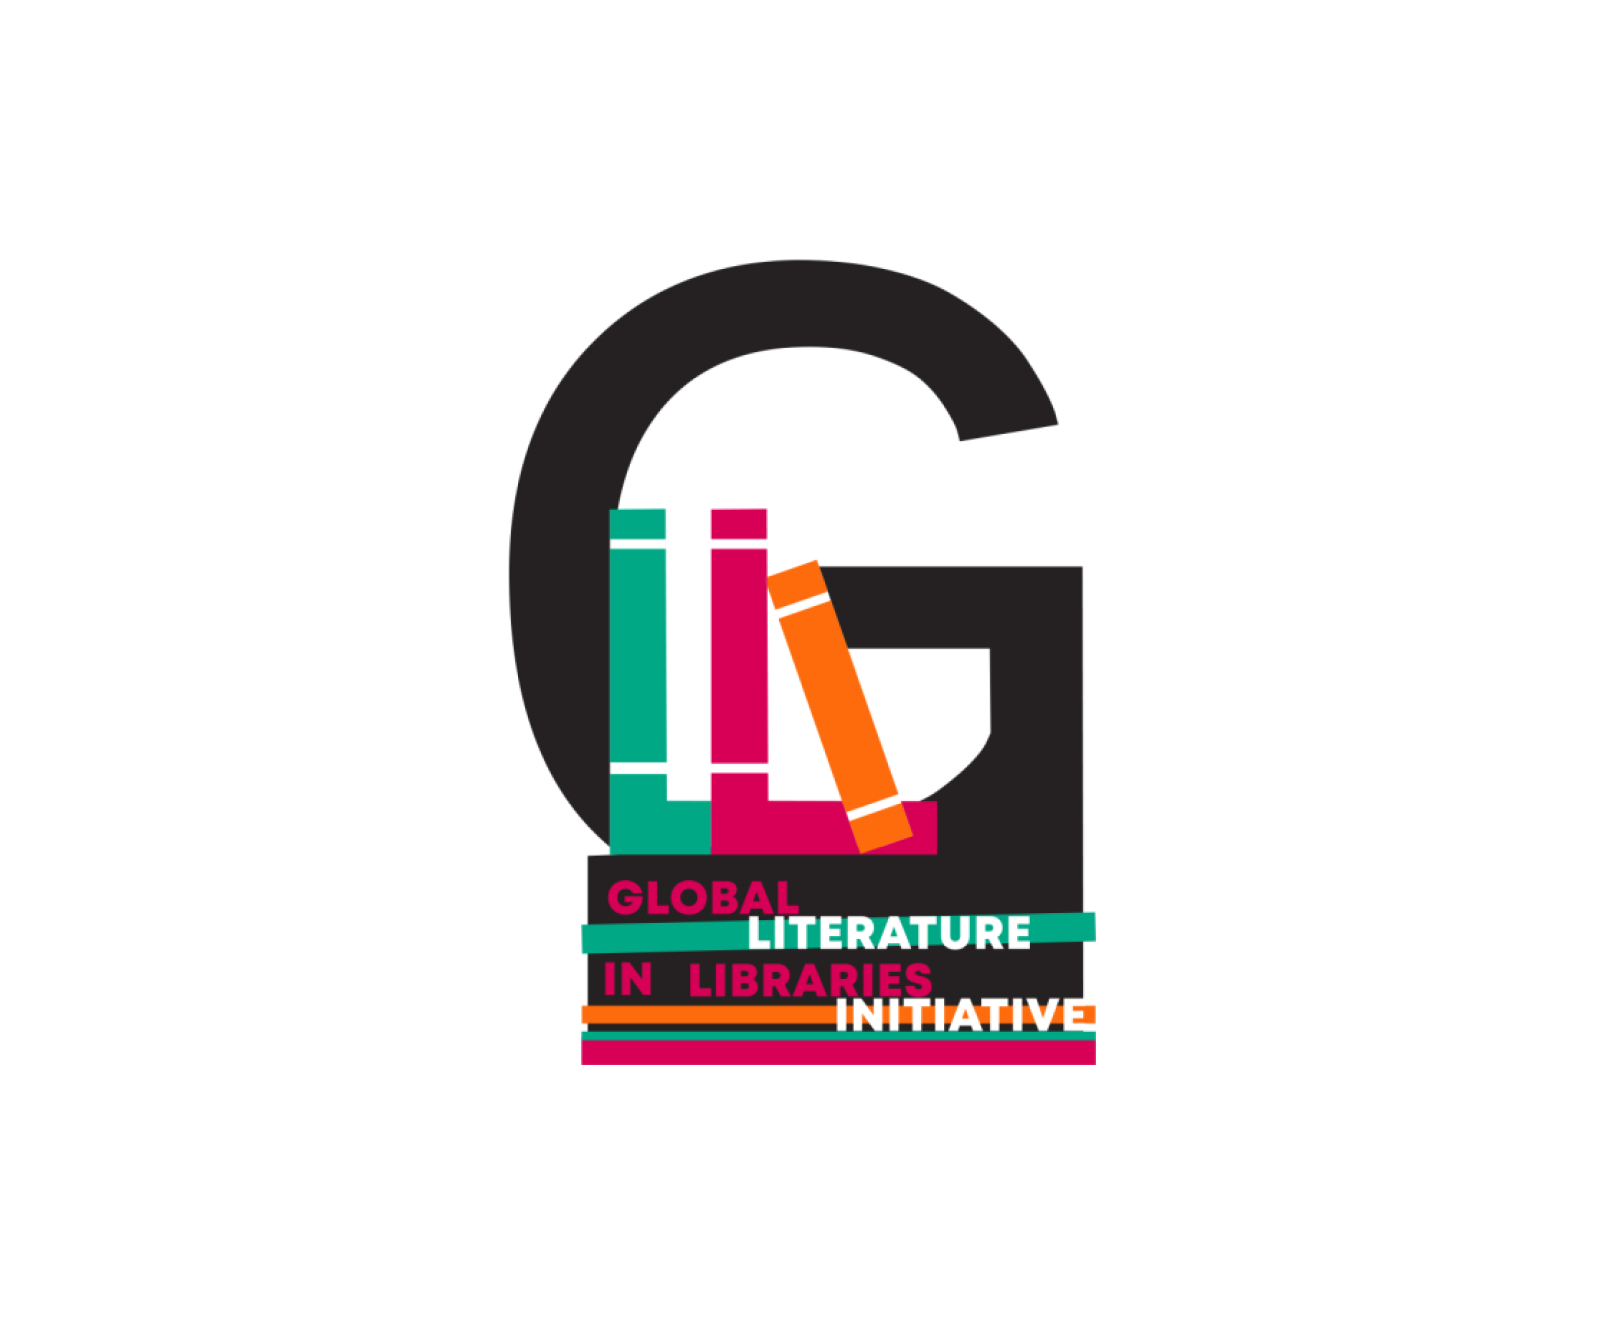 Hero image for the Organizations category featuring the Global Literature in Libraries Initiative logo which is a large black G with a green, reddish-pink, and orange book inside of it sitting on top of a stack of books with the name of the initiative in the foreground.